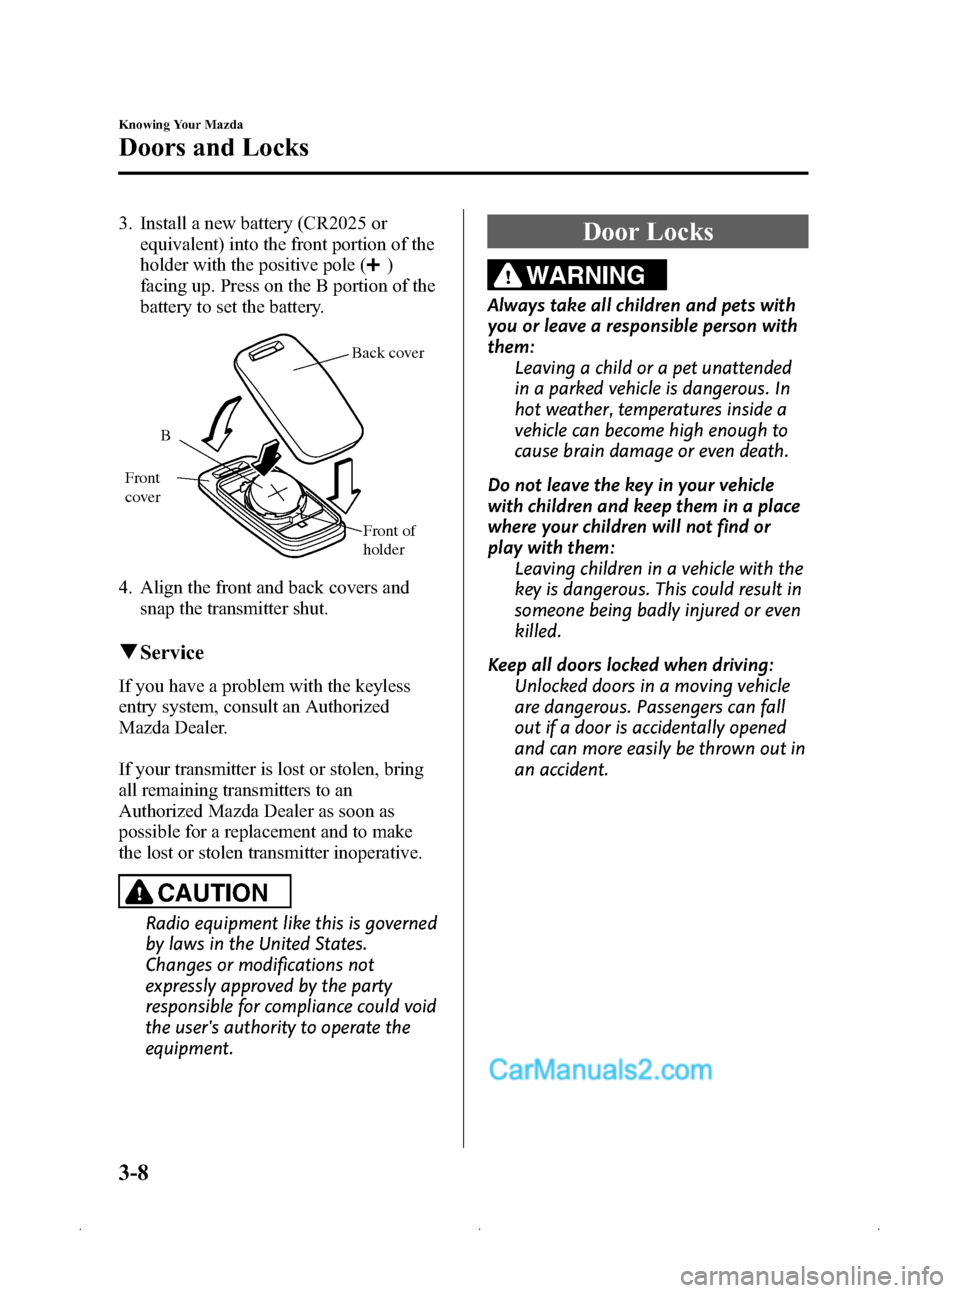 MAZDA MODEL MAZDASPEED 3 2009  Owners Manual (in English) Black plate (82,1)
3. Install a new battery (CR2025 orequivalent) into the front portion of the
holder with the positive pole (
)
facing up. Press on the B portion of the
battery to set the battery.
B